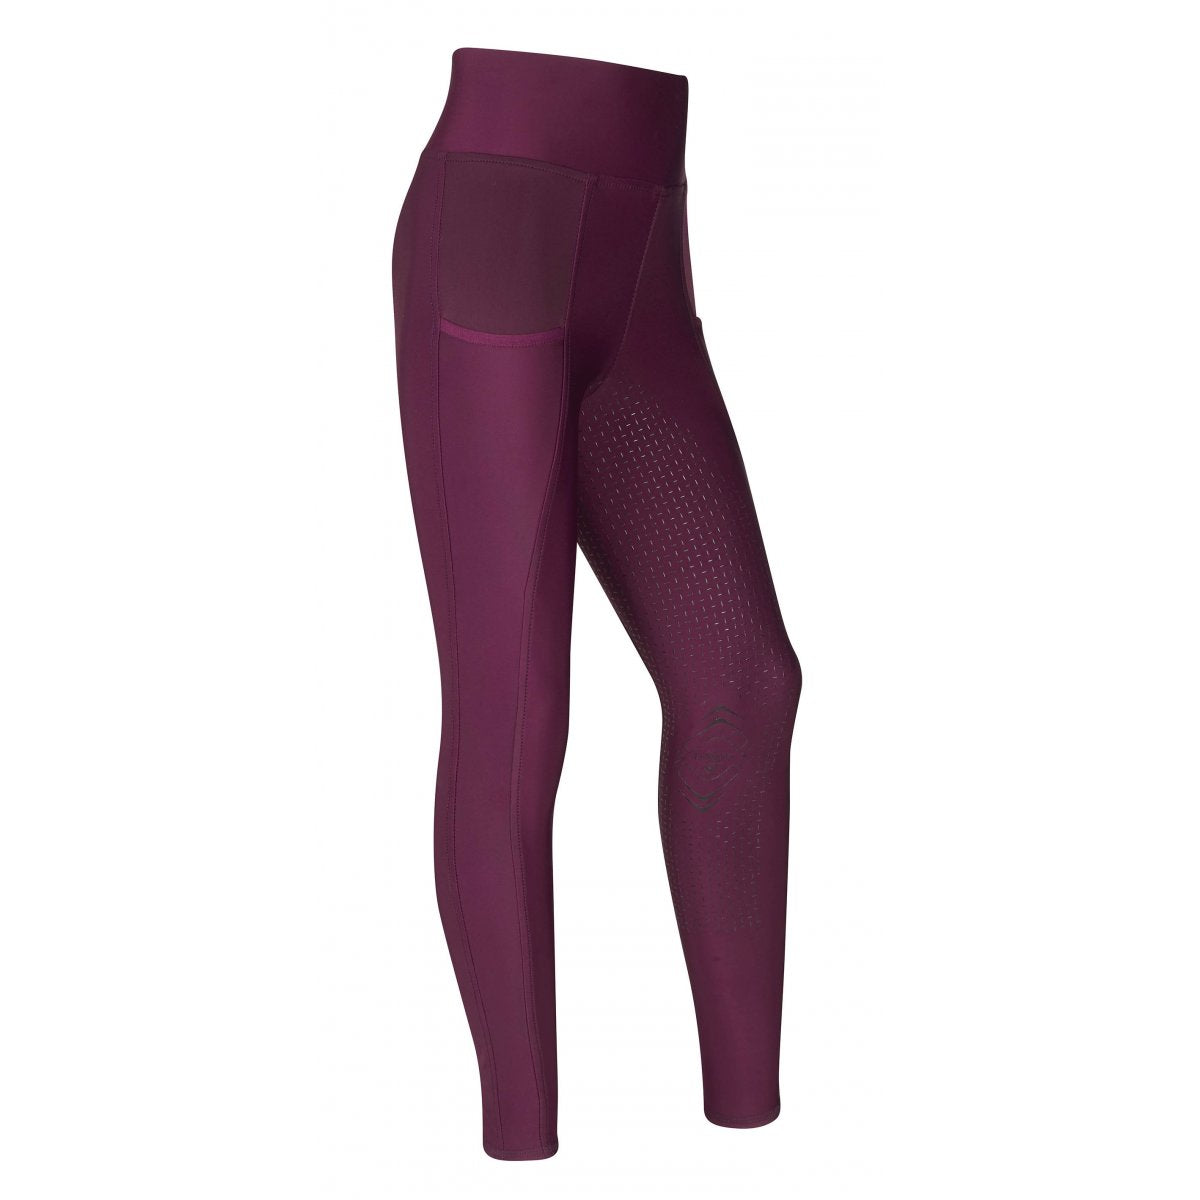 Purple horse riding tights with pockets and textured knee patches.